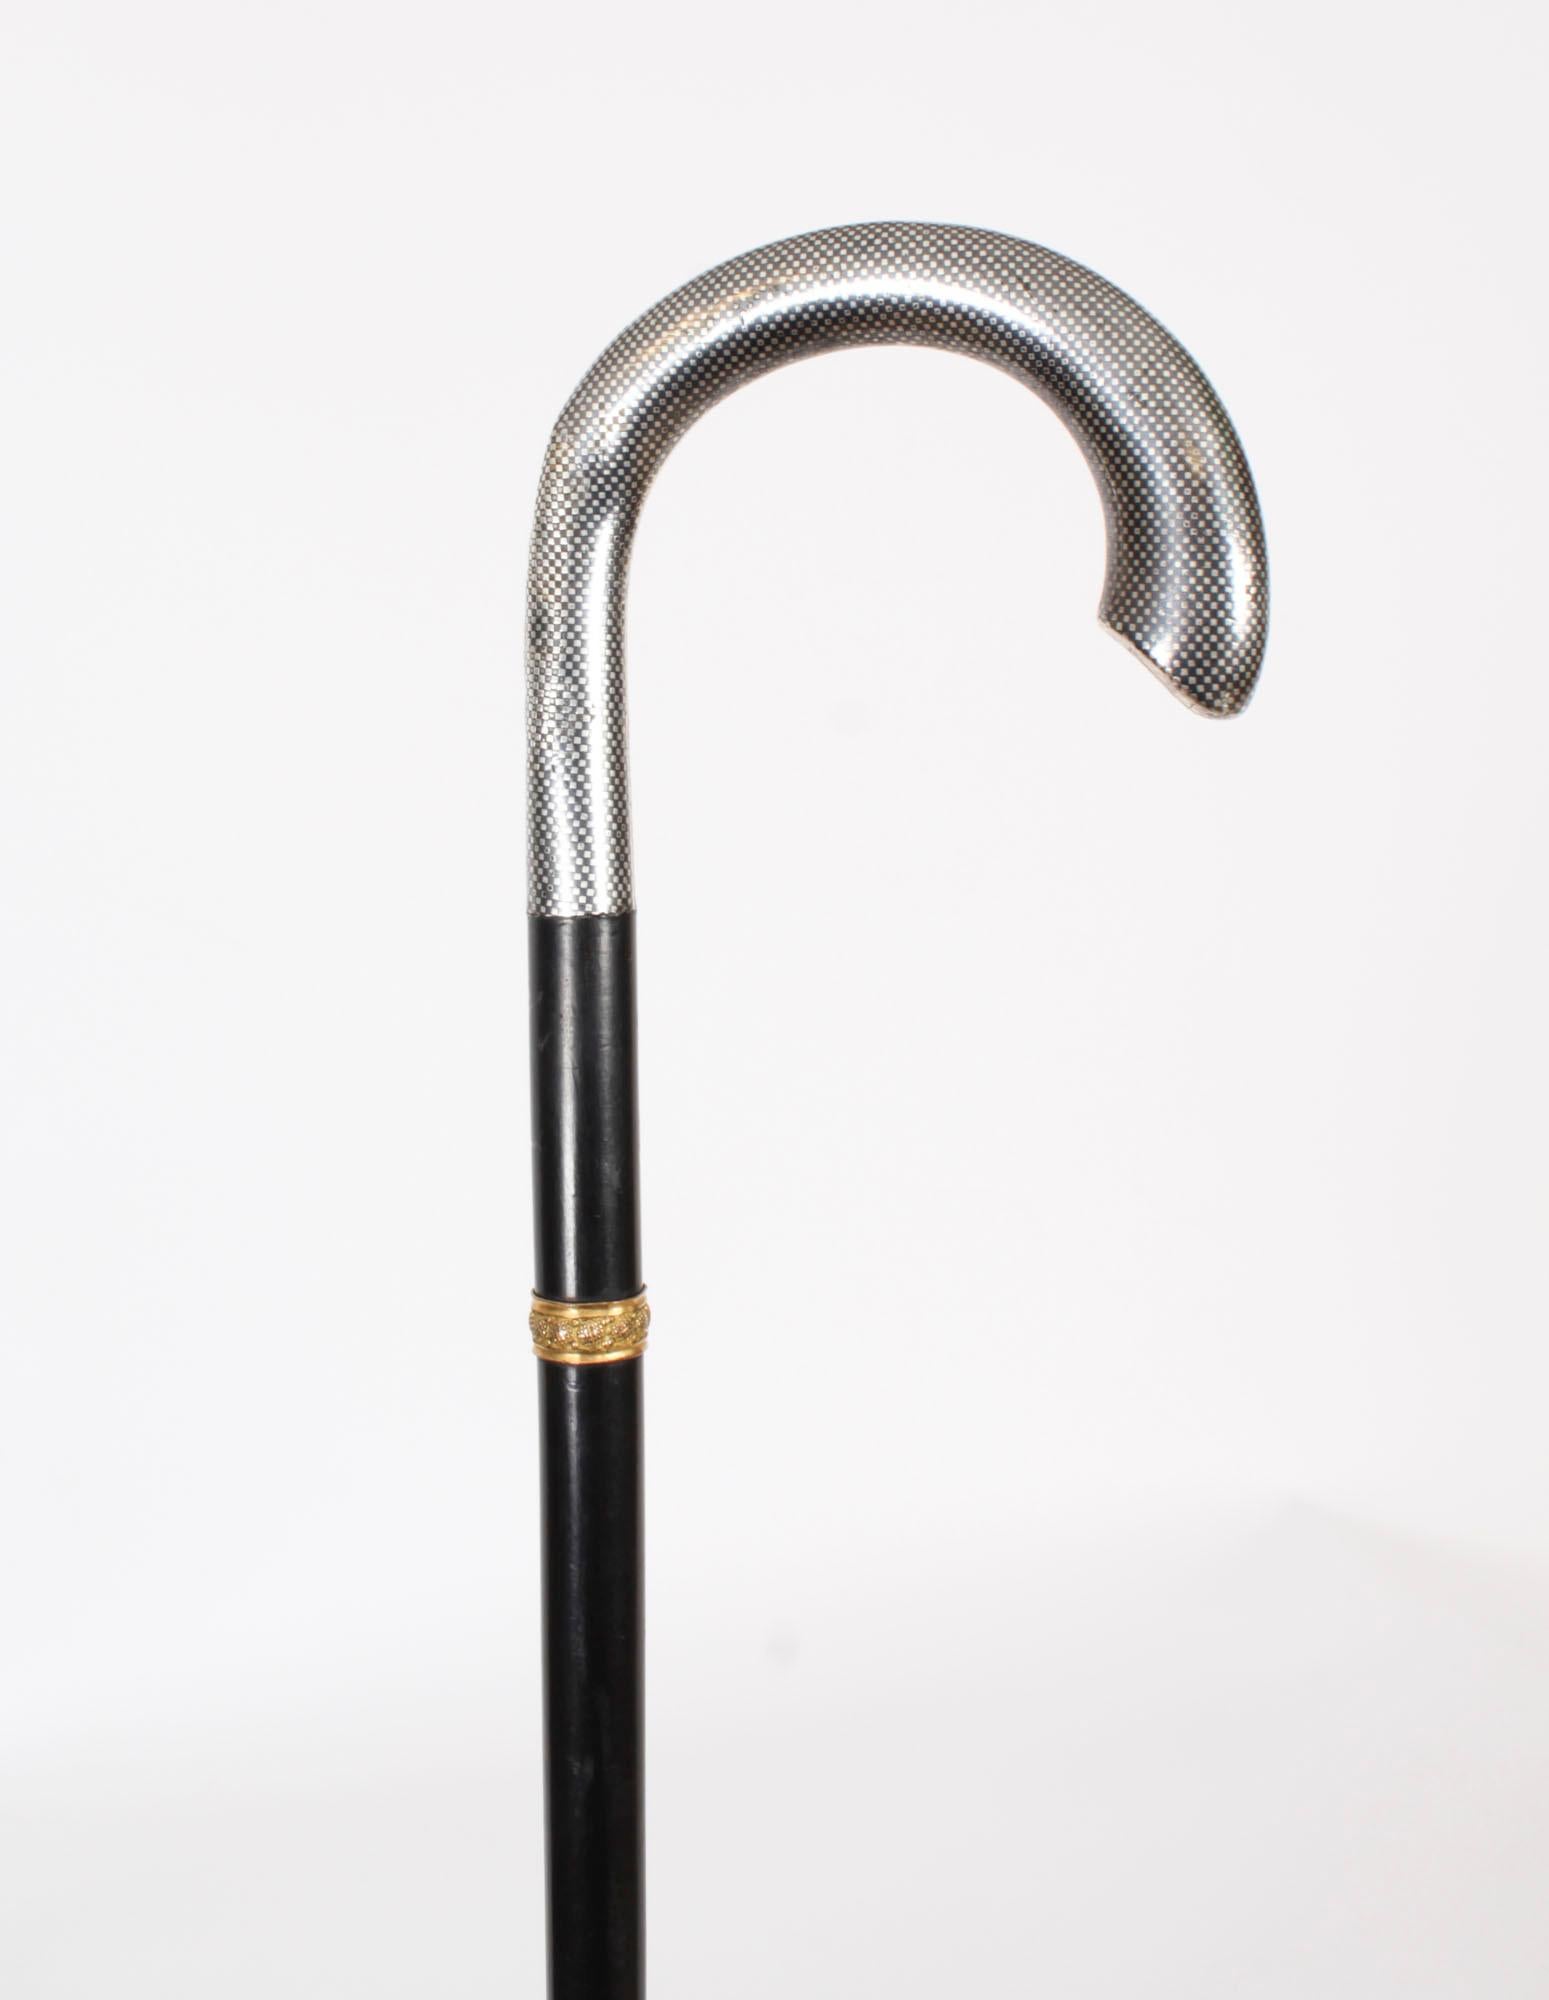 A decorative antique Russian silver niello handled walking cane, Circa 1880 in date.

It has a very decorative silver hook shaped handle with contours made with great attention to detail,  above a sturdy hardwood ebonised tapering shaft with a gold